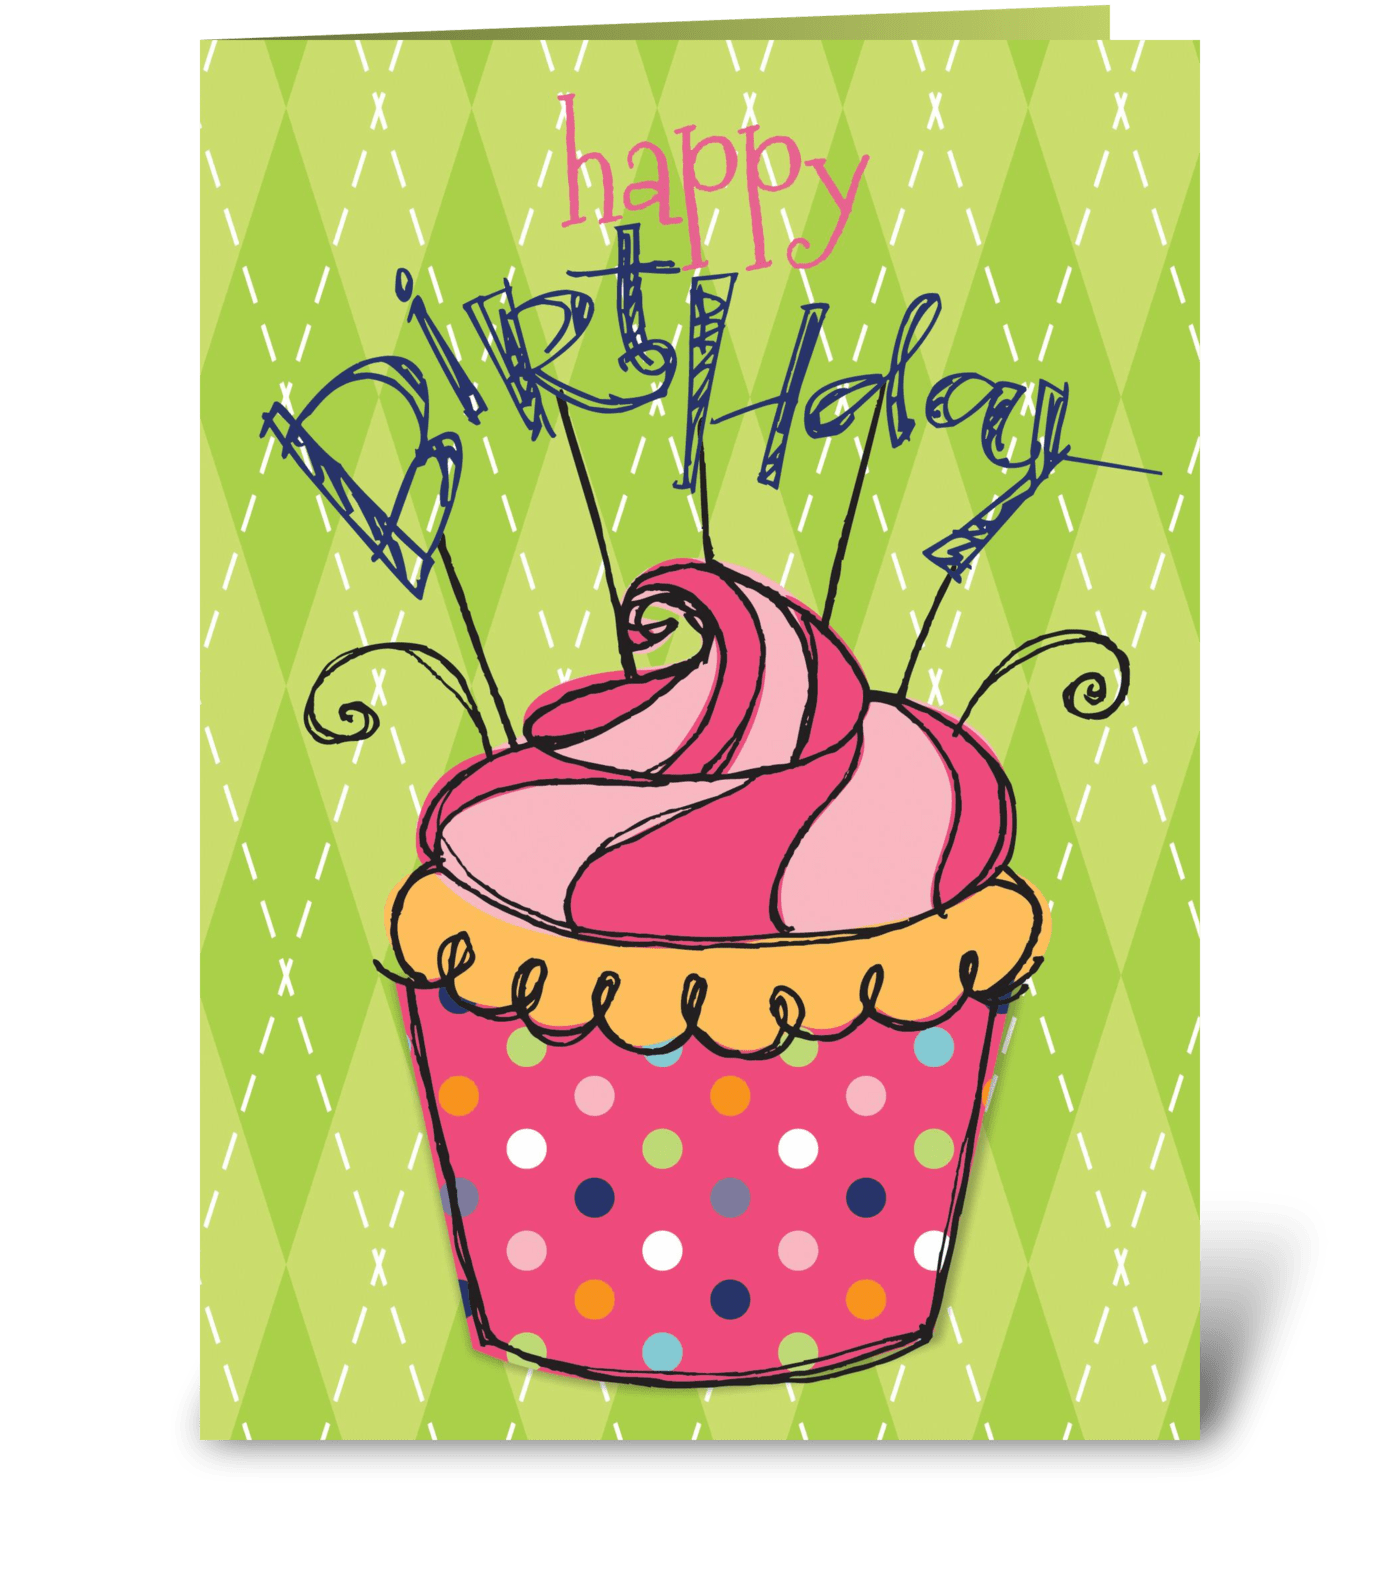 Happy Birthday Cupcake Send this greeting card designed by The Jewel